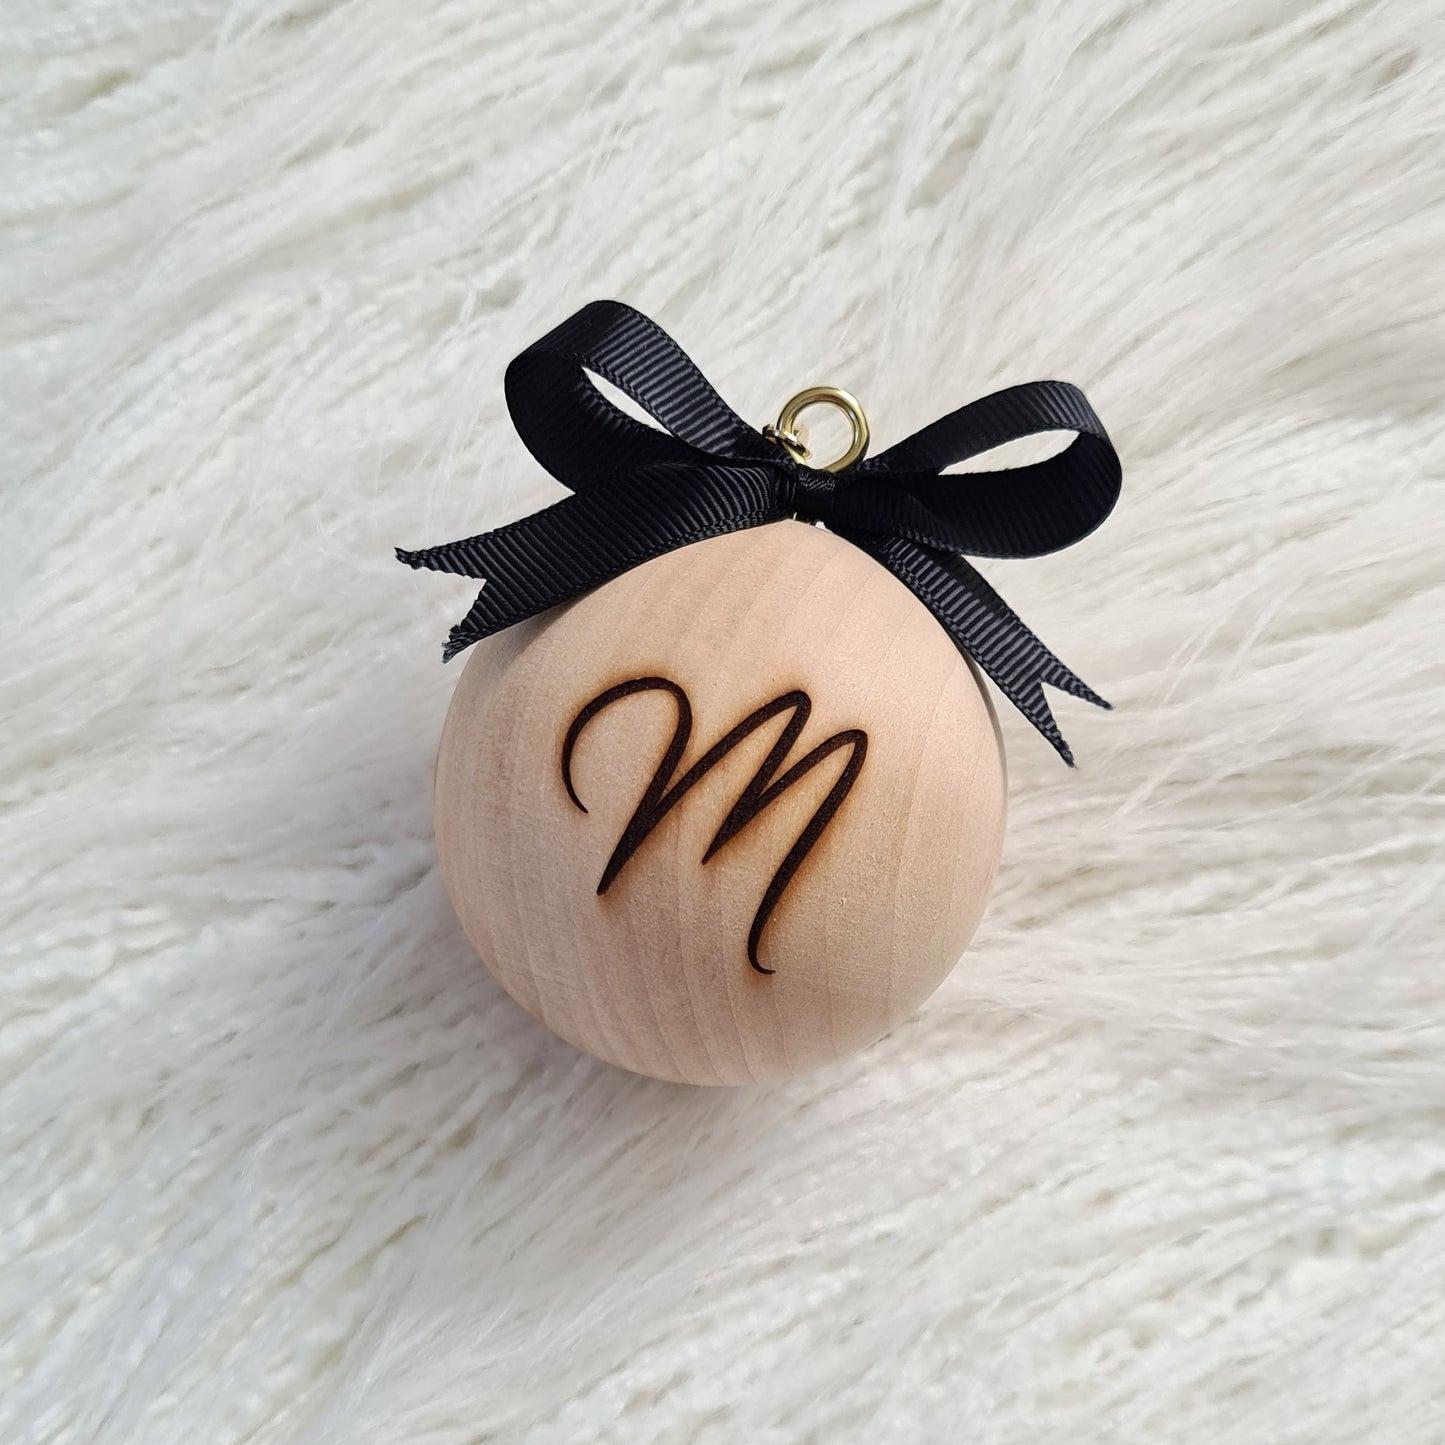 MINI WOODEN (6cm) Initial Handcrafted Bauble